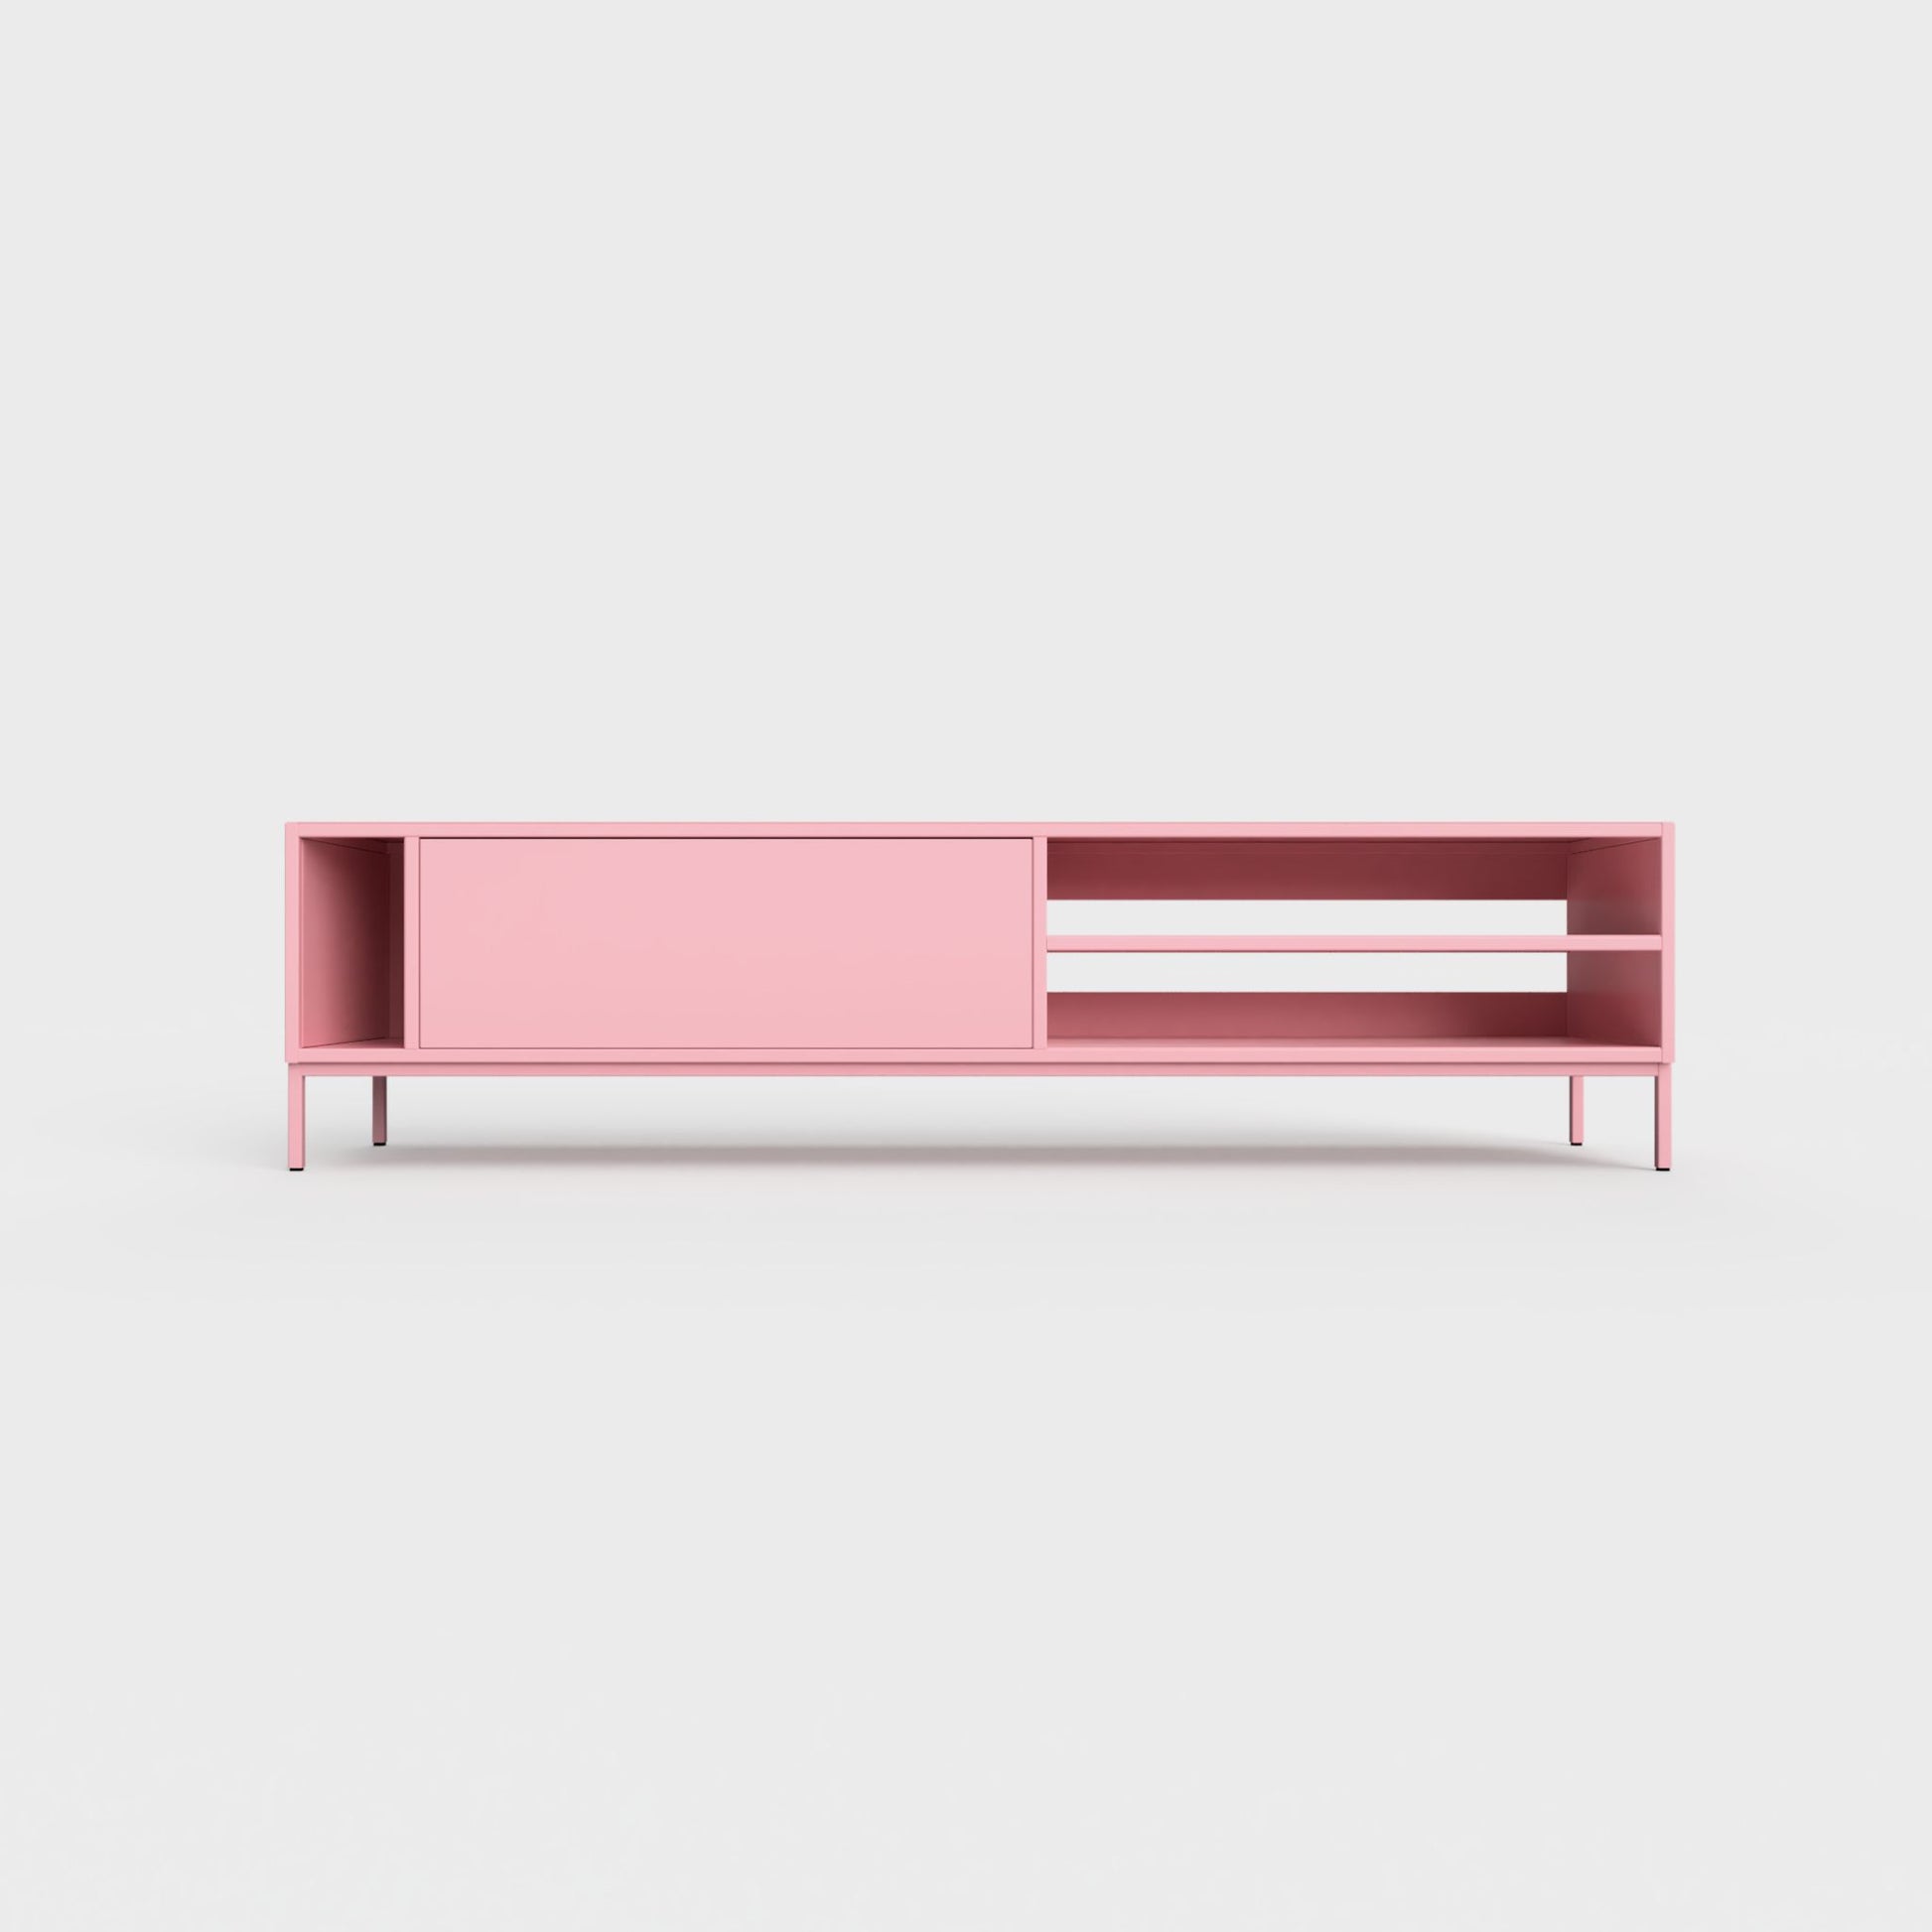 Prunus 03 Lowboard in pink lily color, powder-coated steel, elegant and modern piece of furniture for your living room